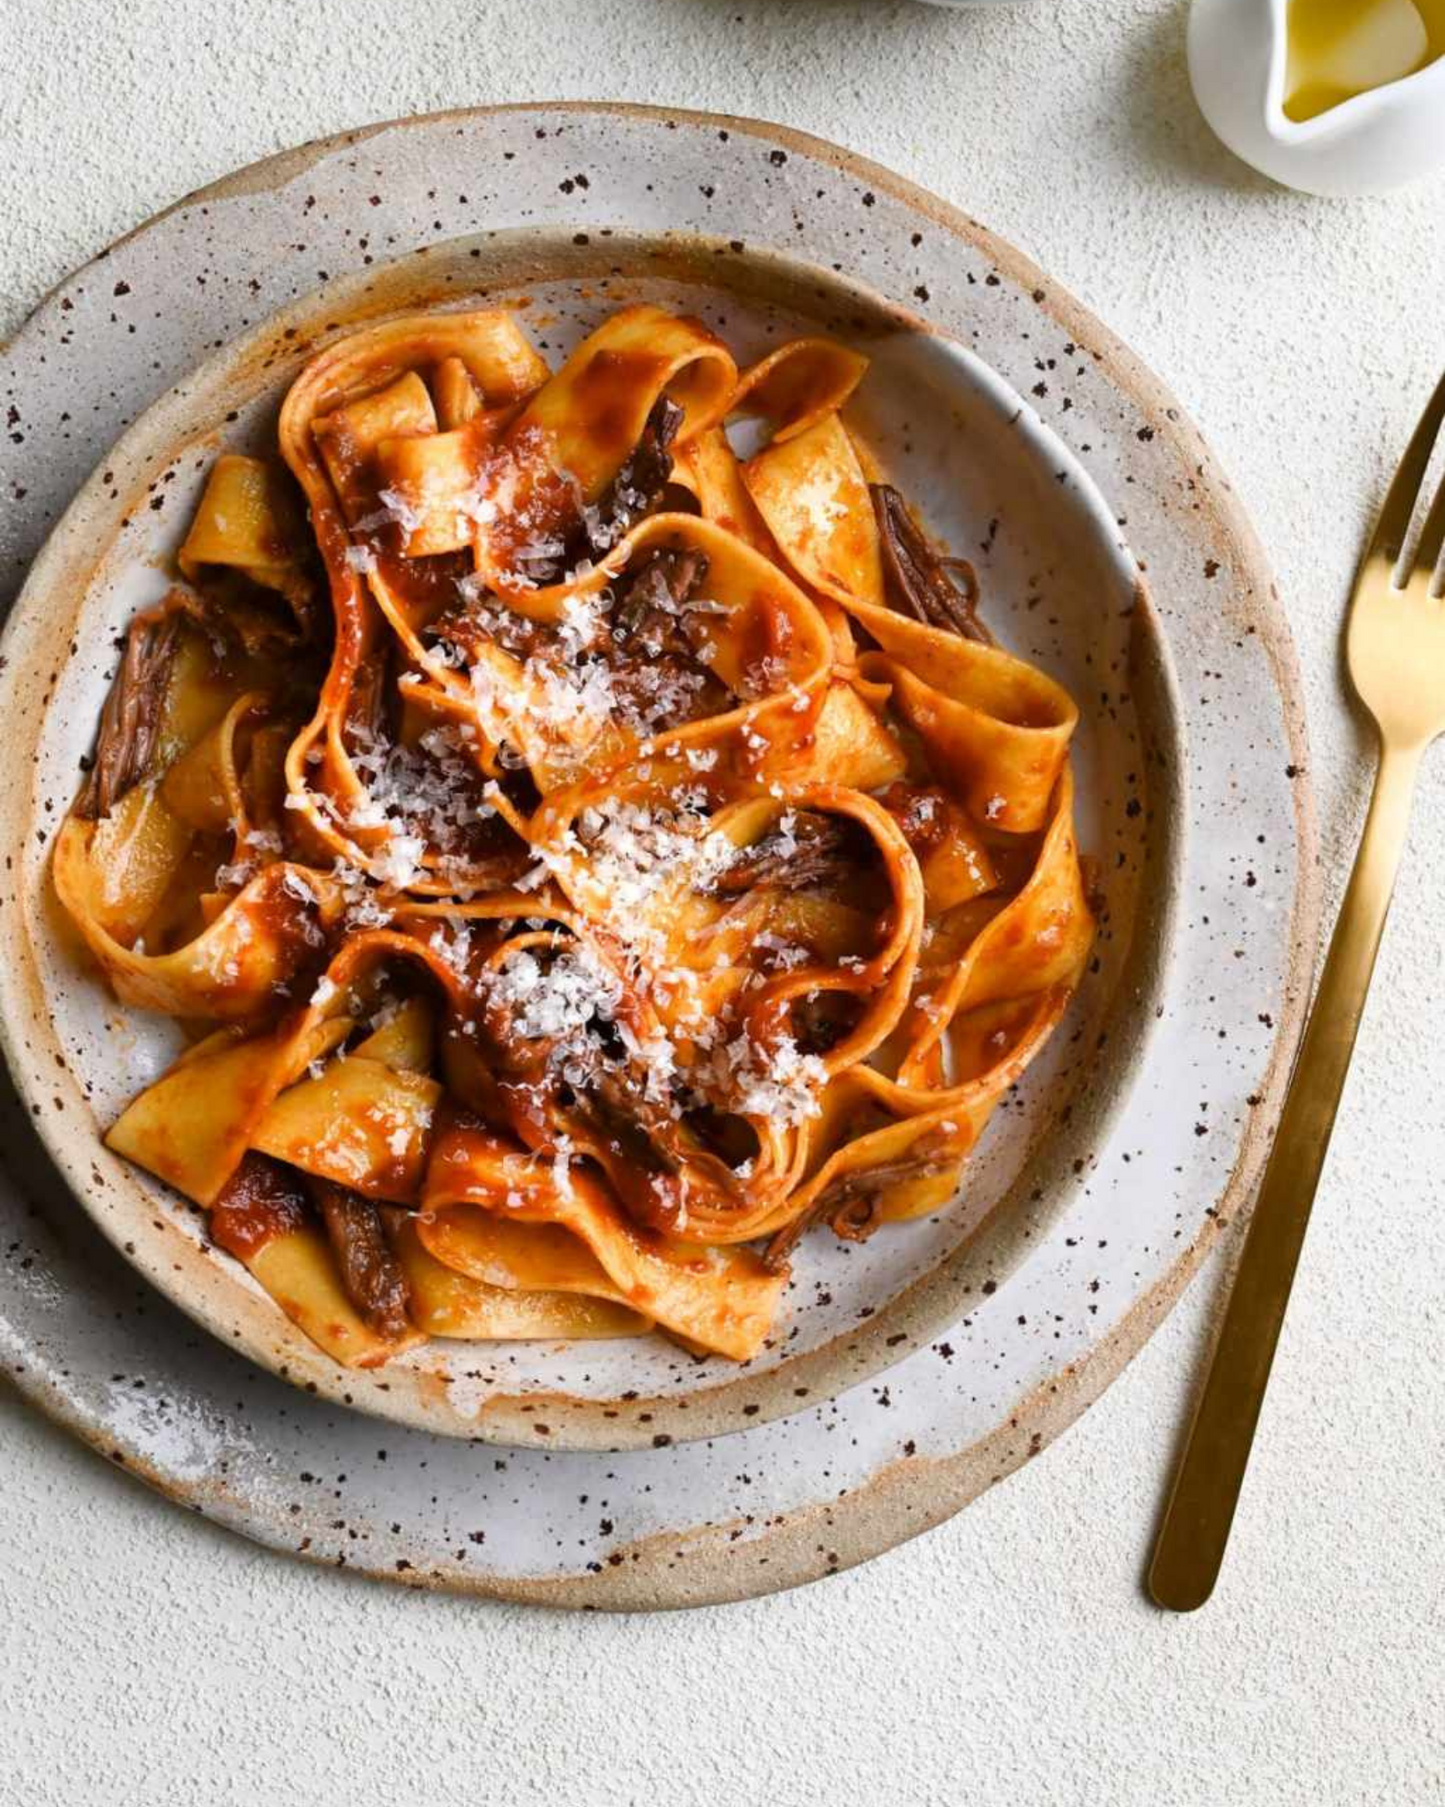 Makaroni Pappardelle 250g